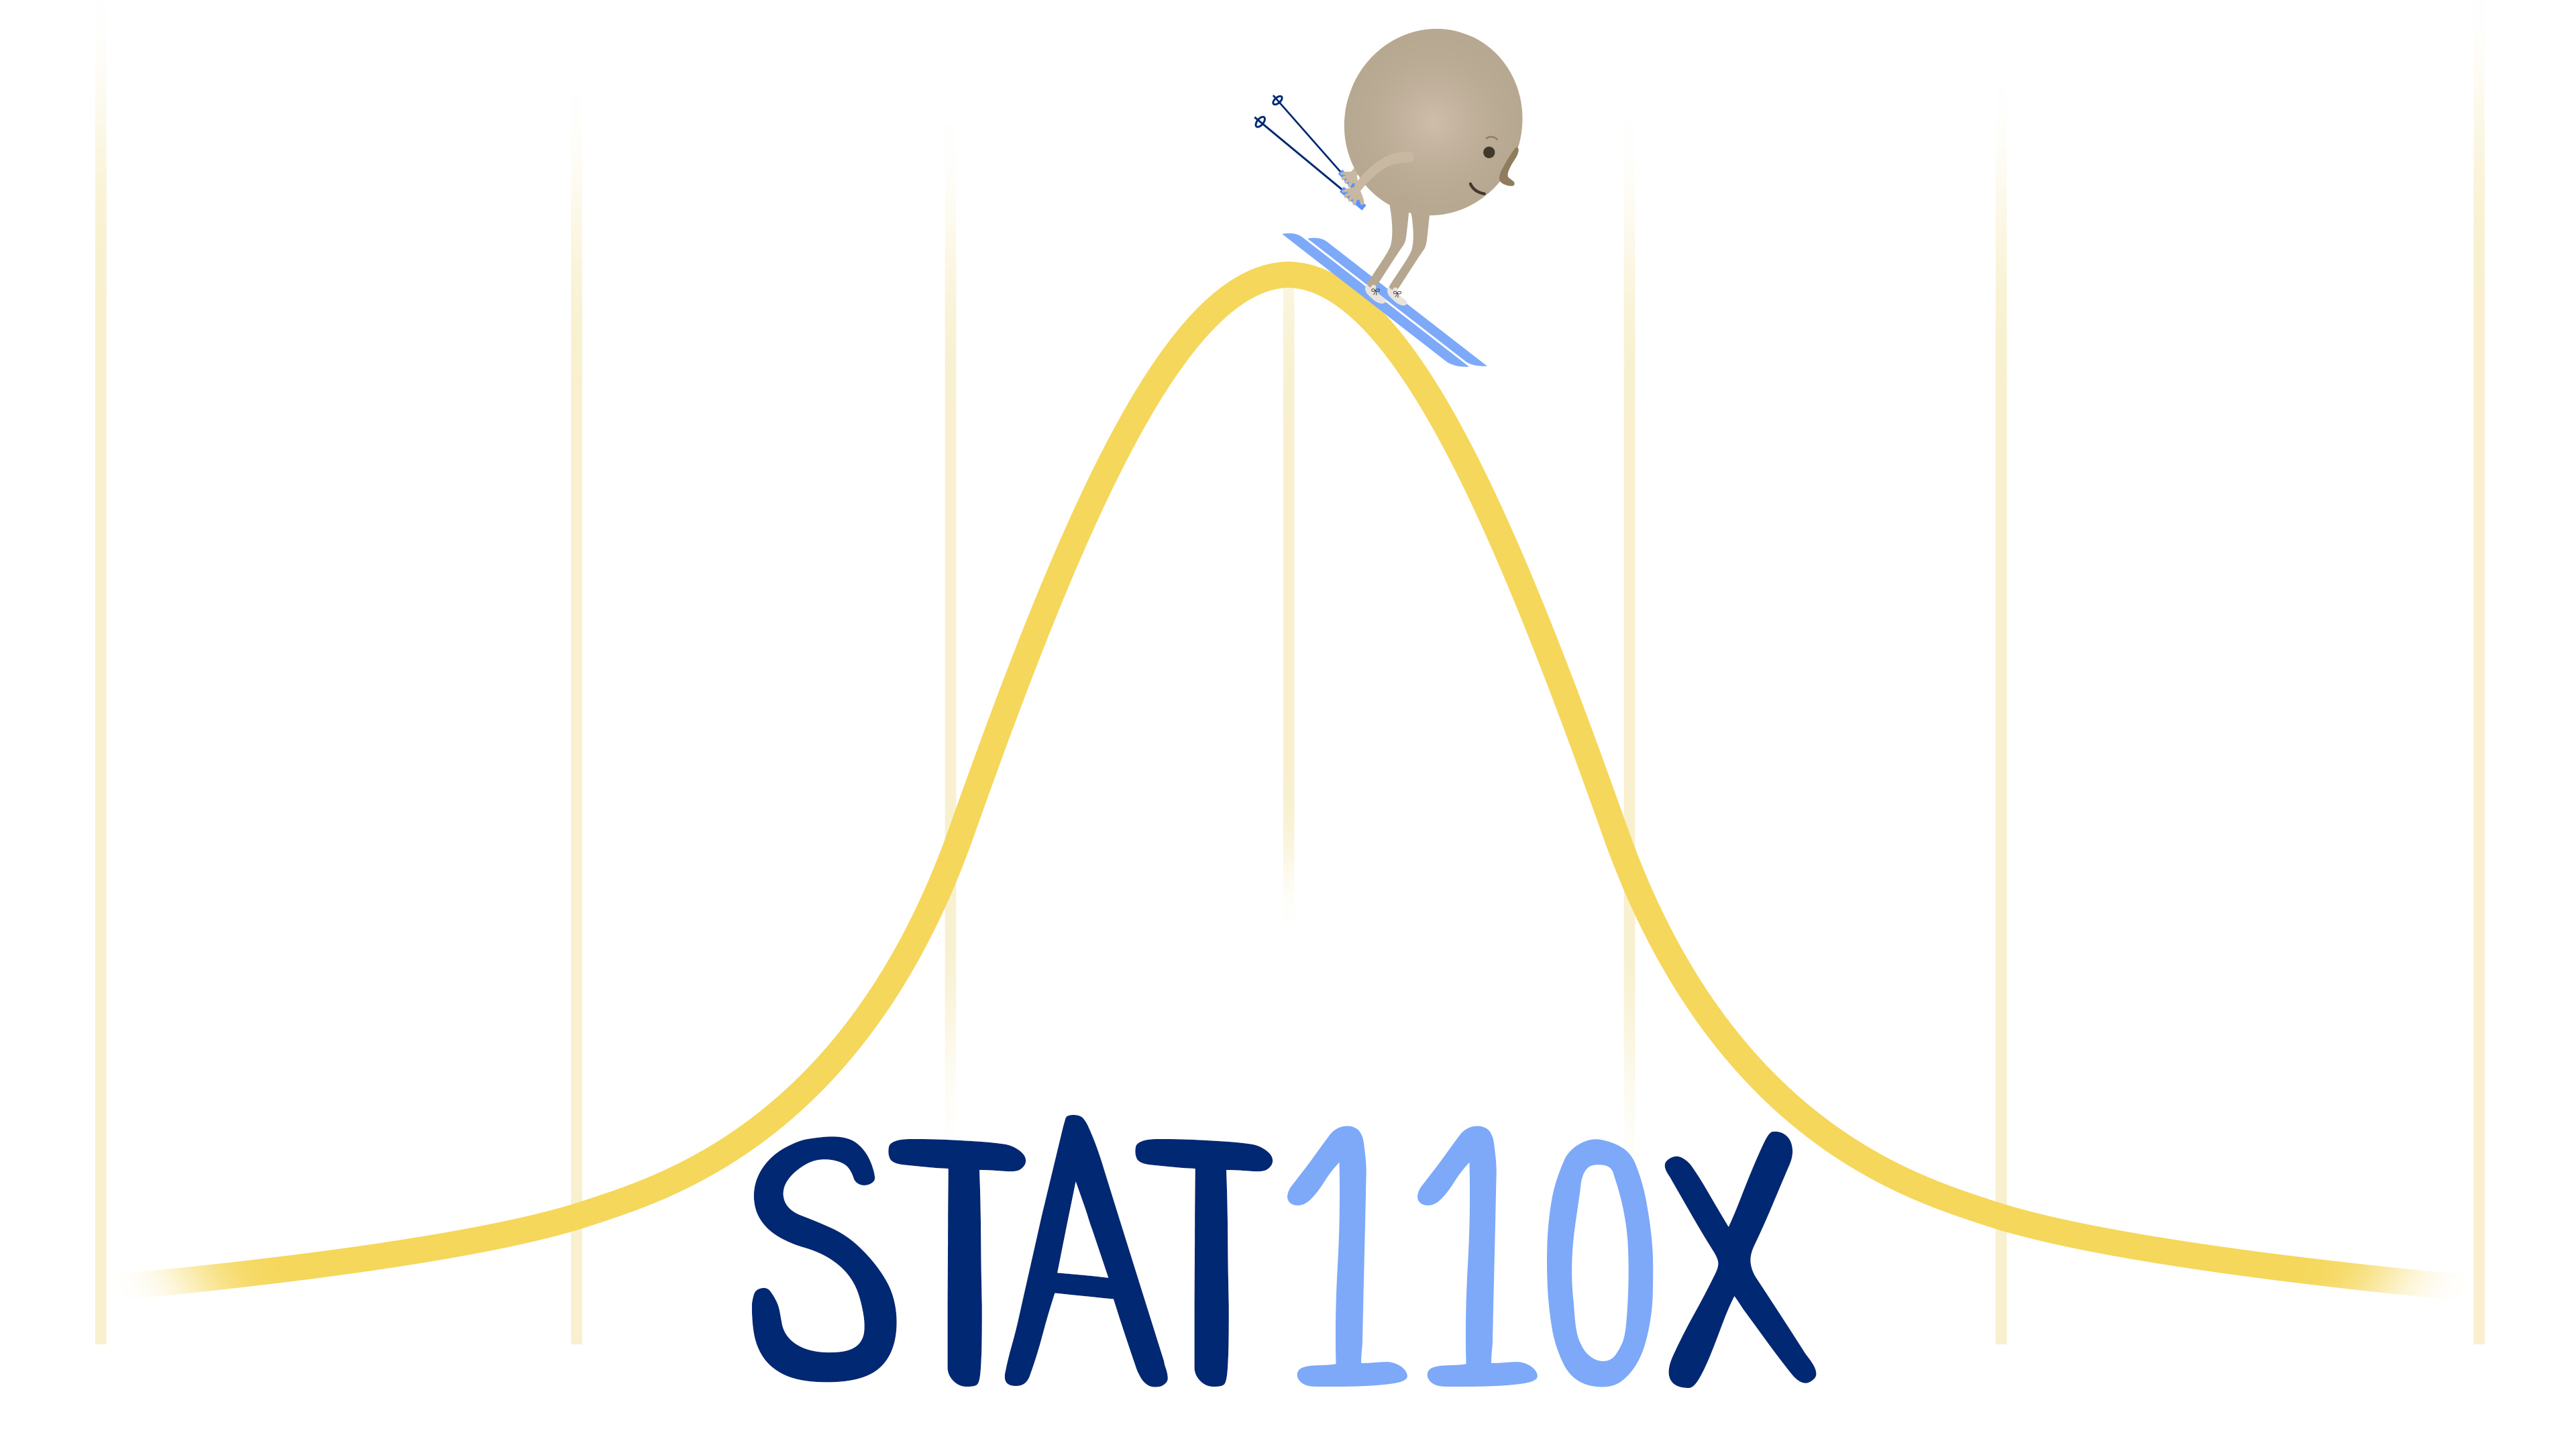 a spehere-shaped character skiing down a slope shaped like a normal distribution curve